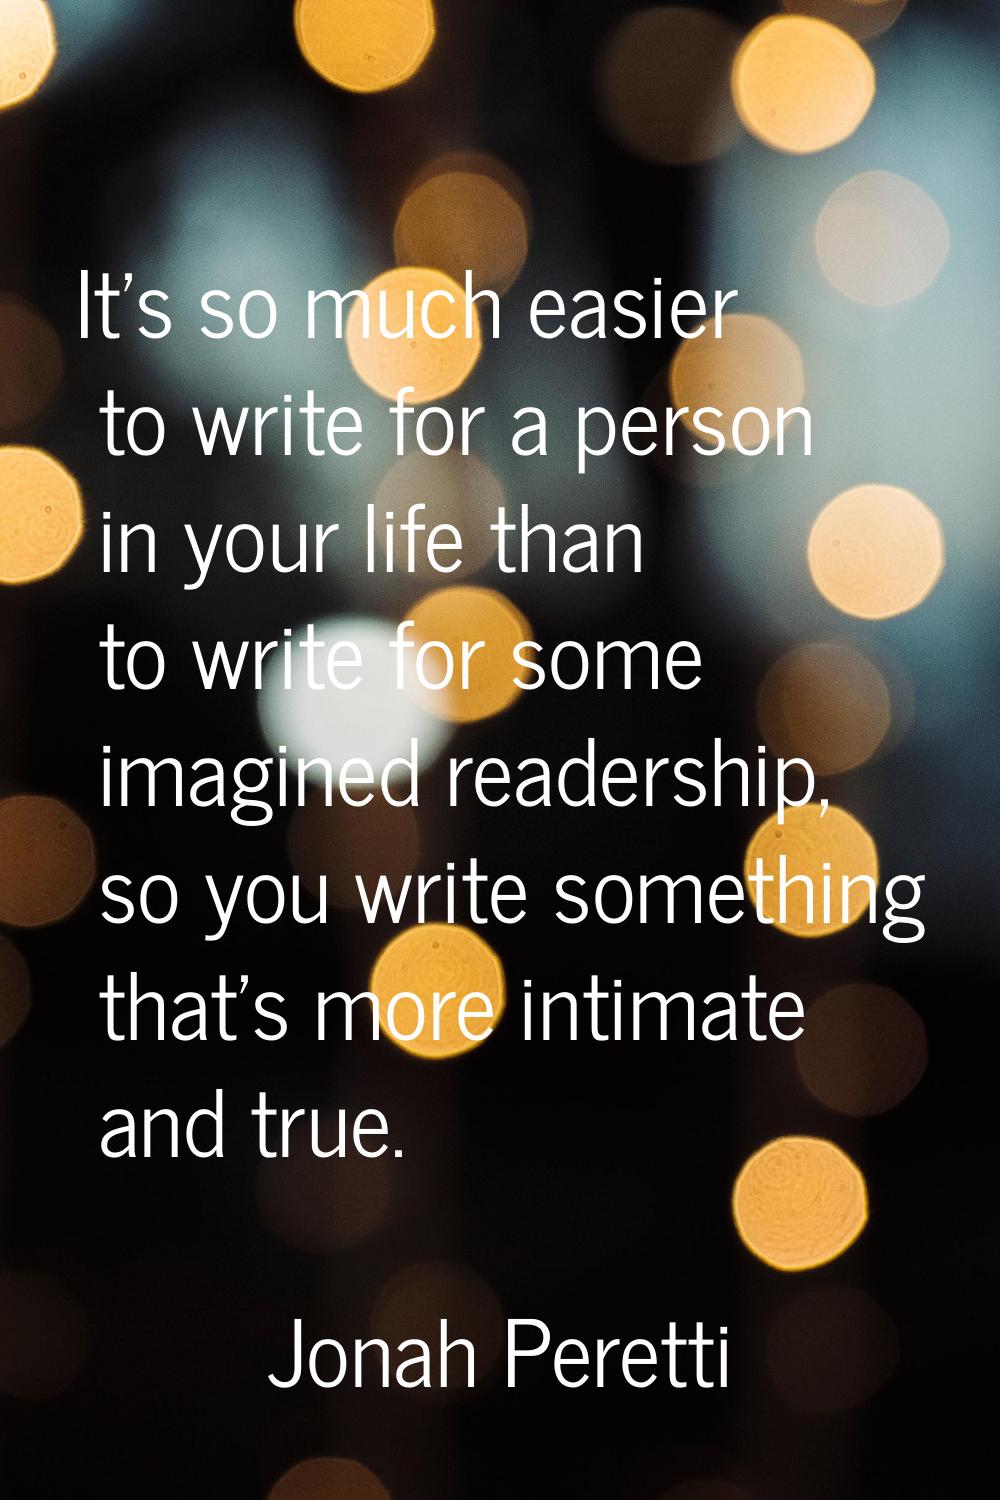 It's so much easier to write for a person in your life than to write for some imagined readership, 